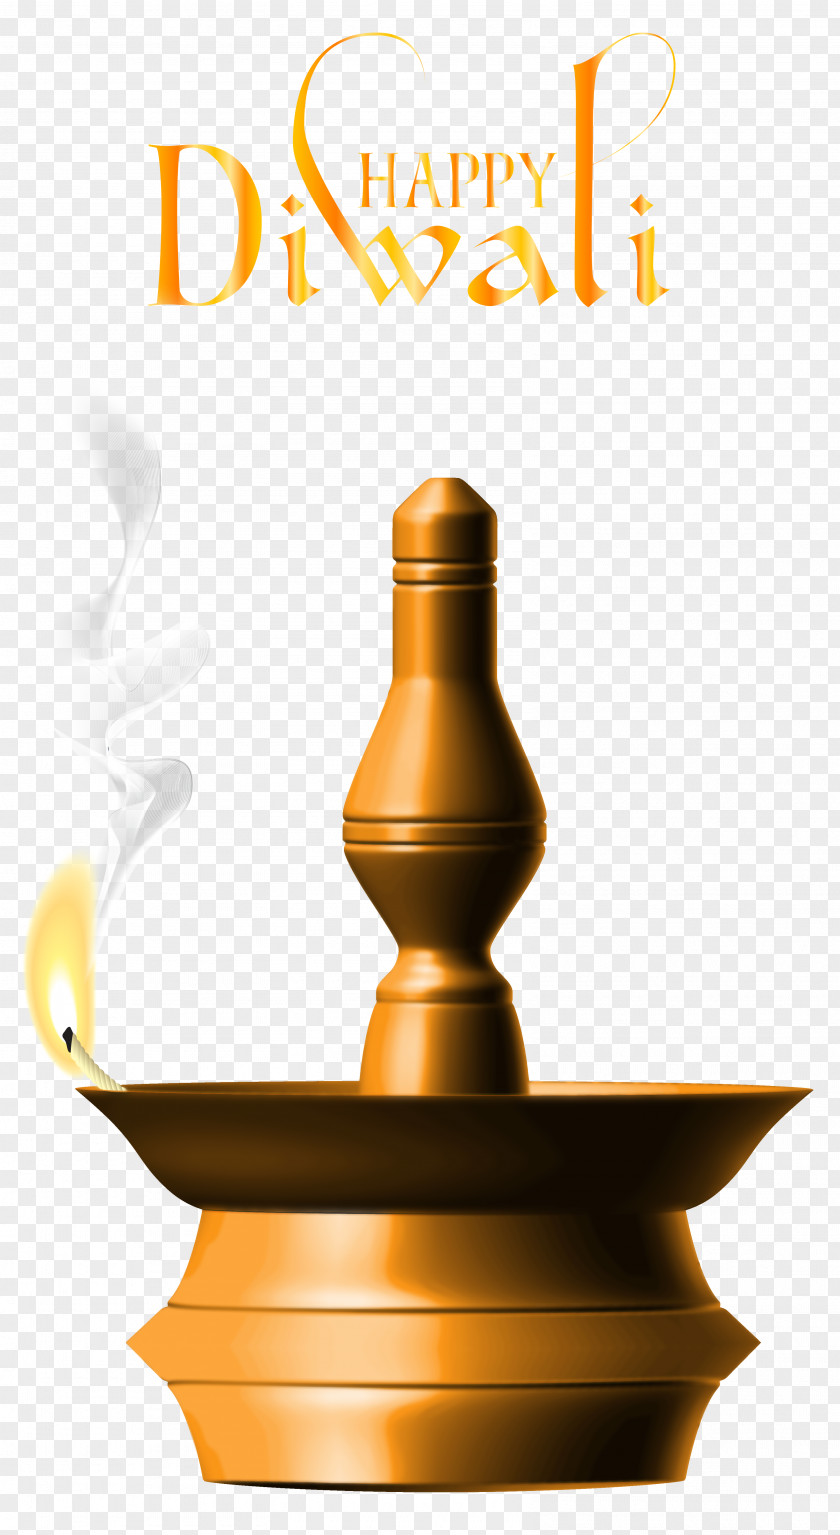 Happy Diwali Candle Clipart Image Clip Art PNG